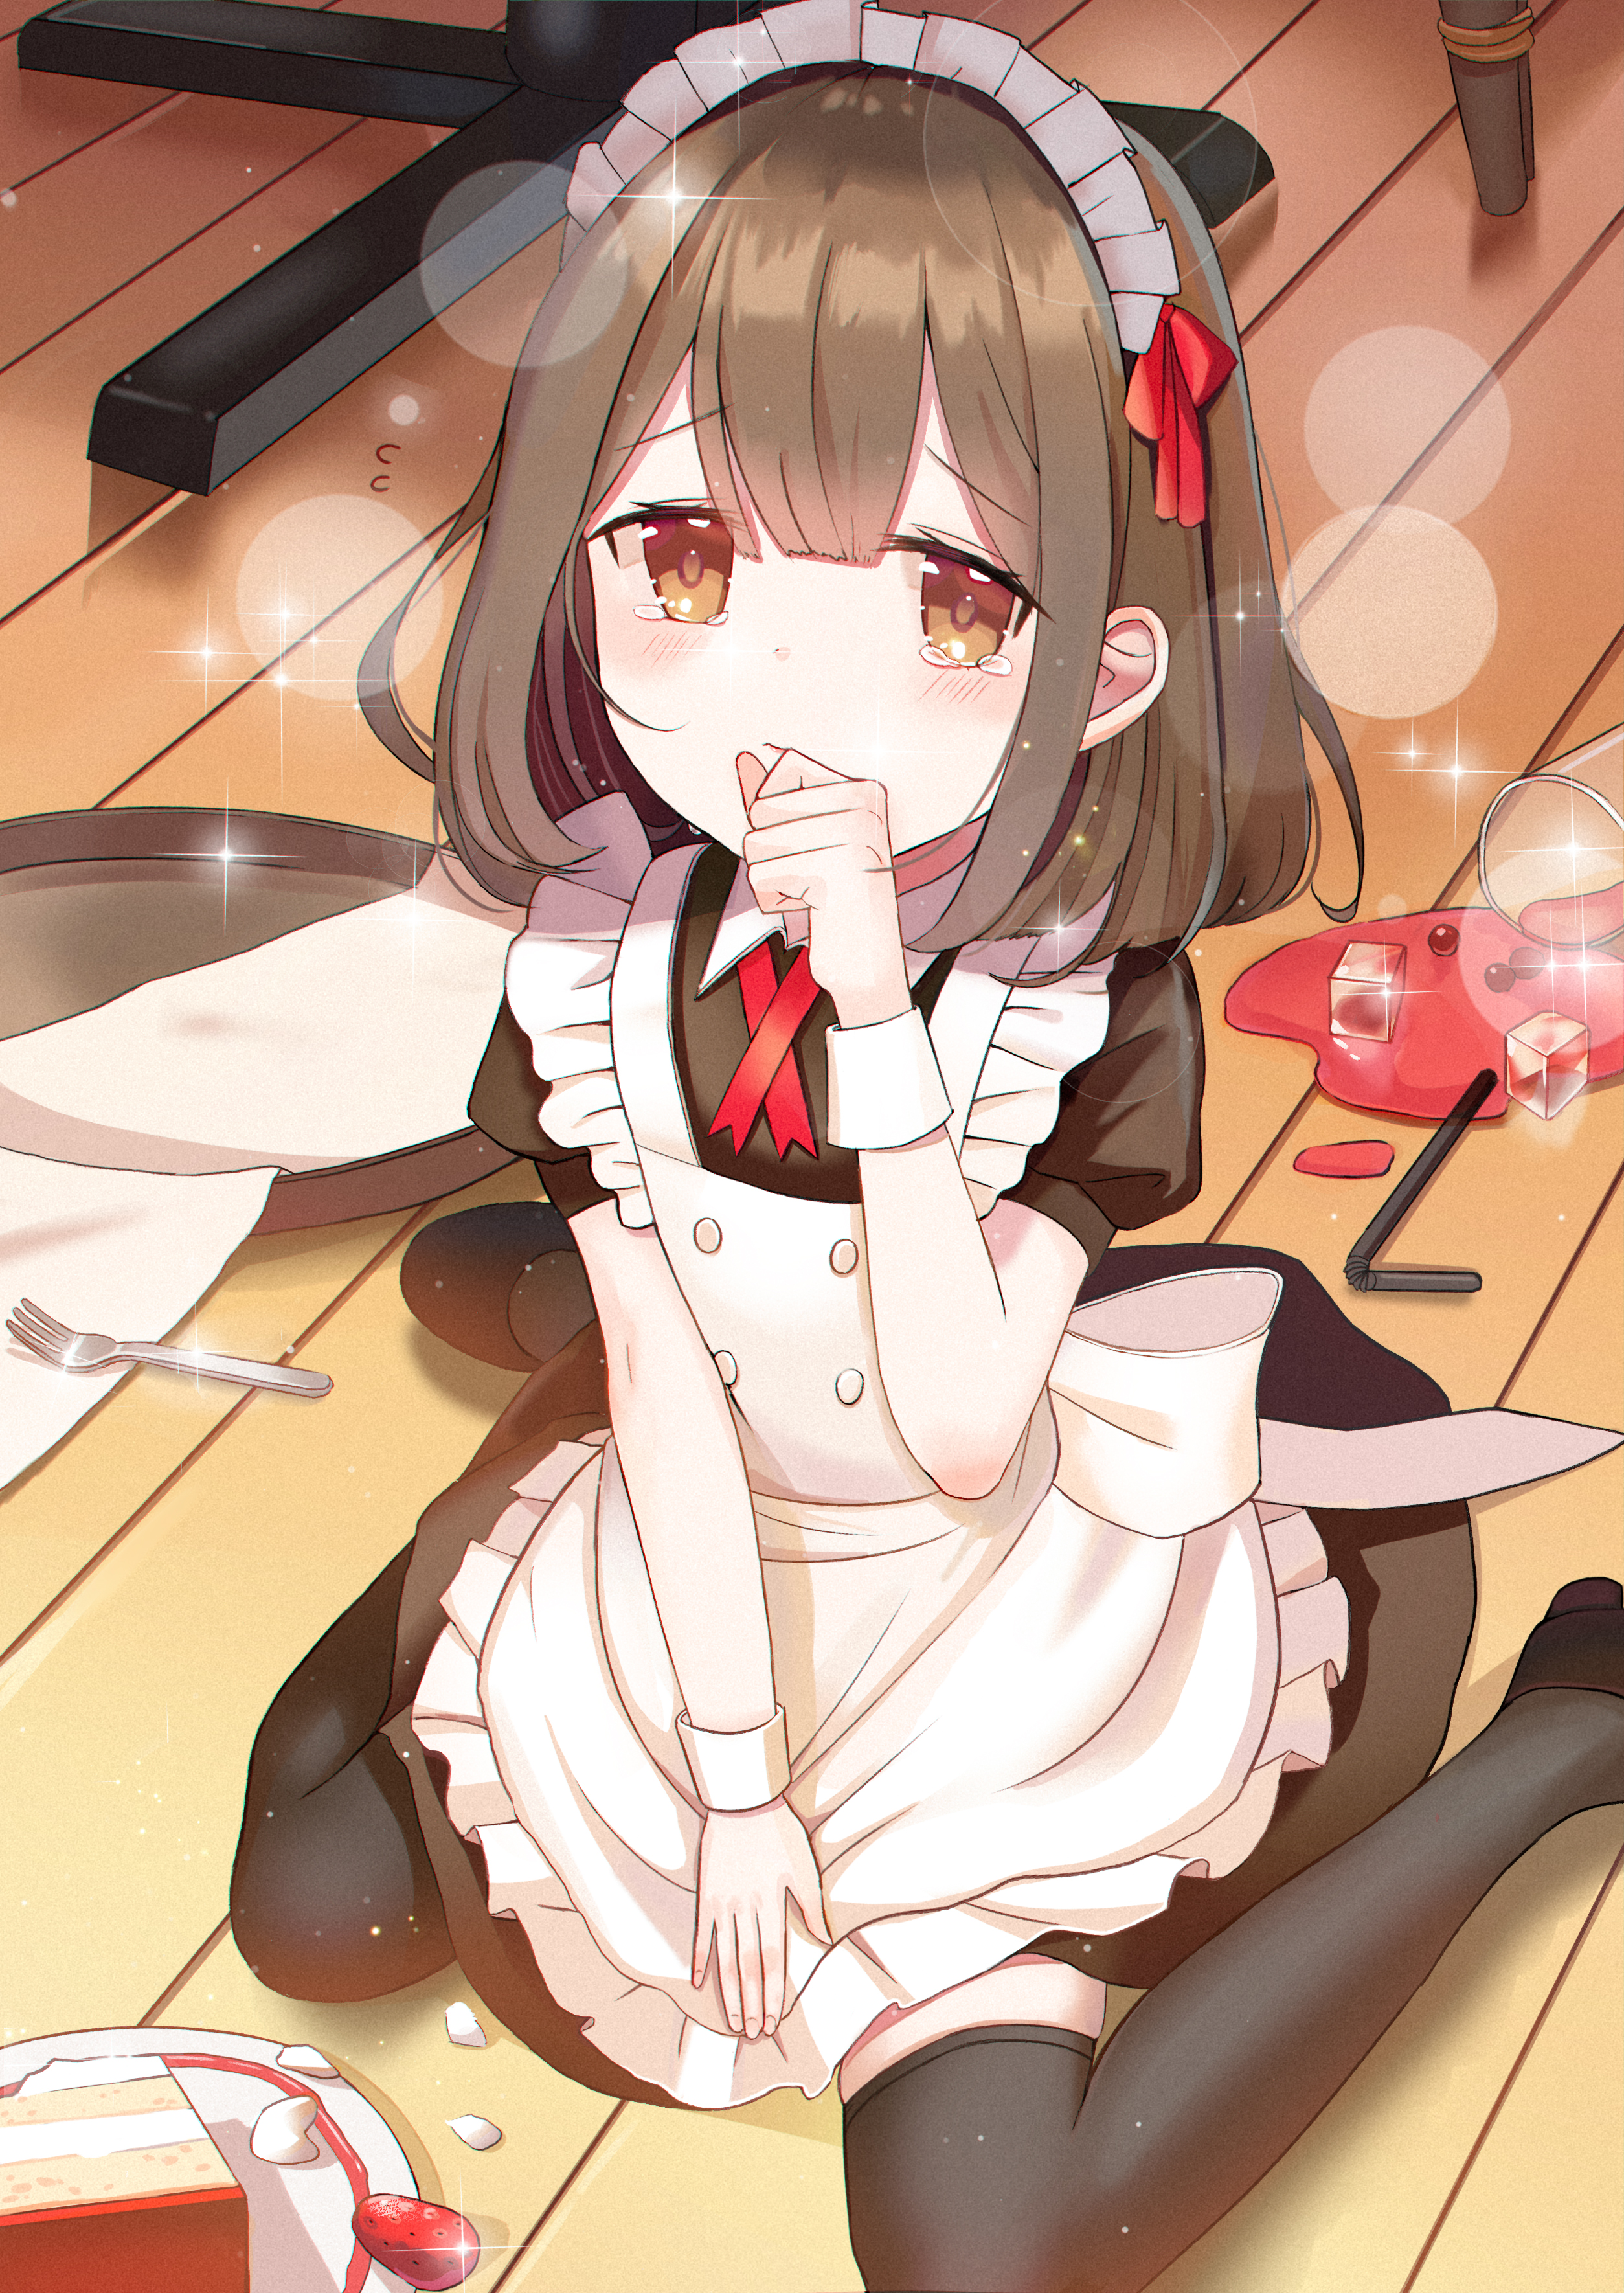 Anime 2508x3541 anime anime girls maid outfit portrait display maid fork strawberries stockings